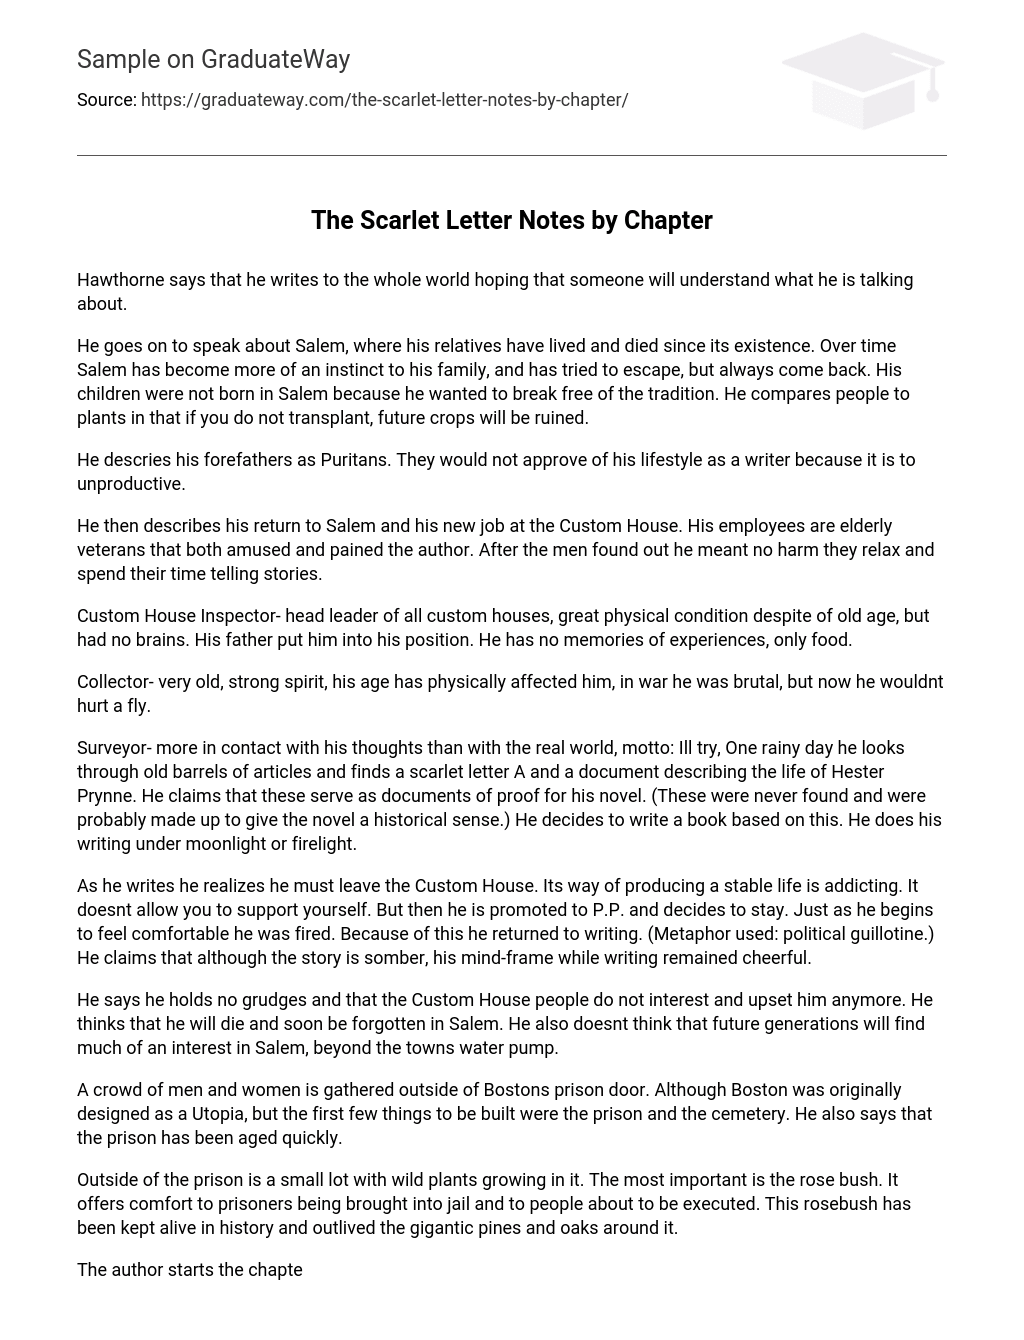 “The Scarlet Letter Notes” by Chapter